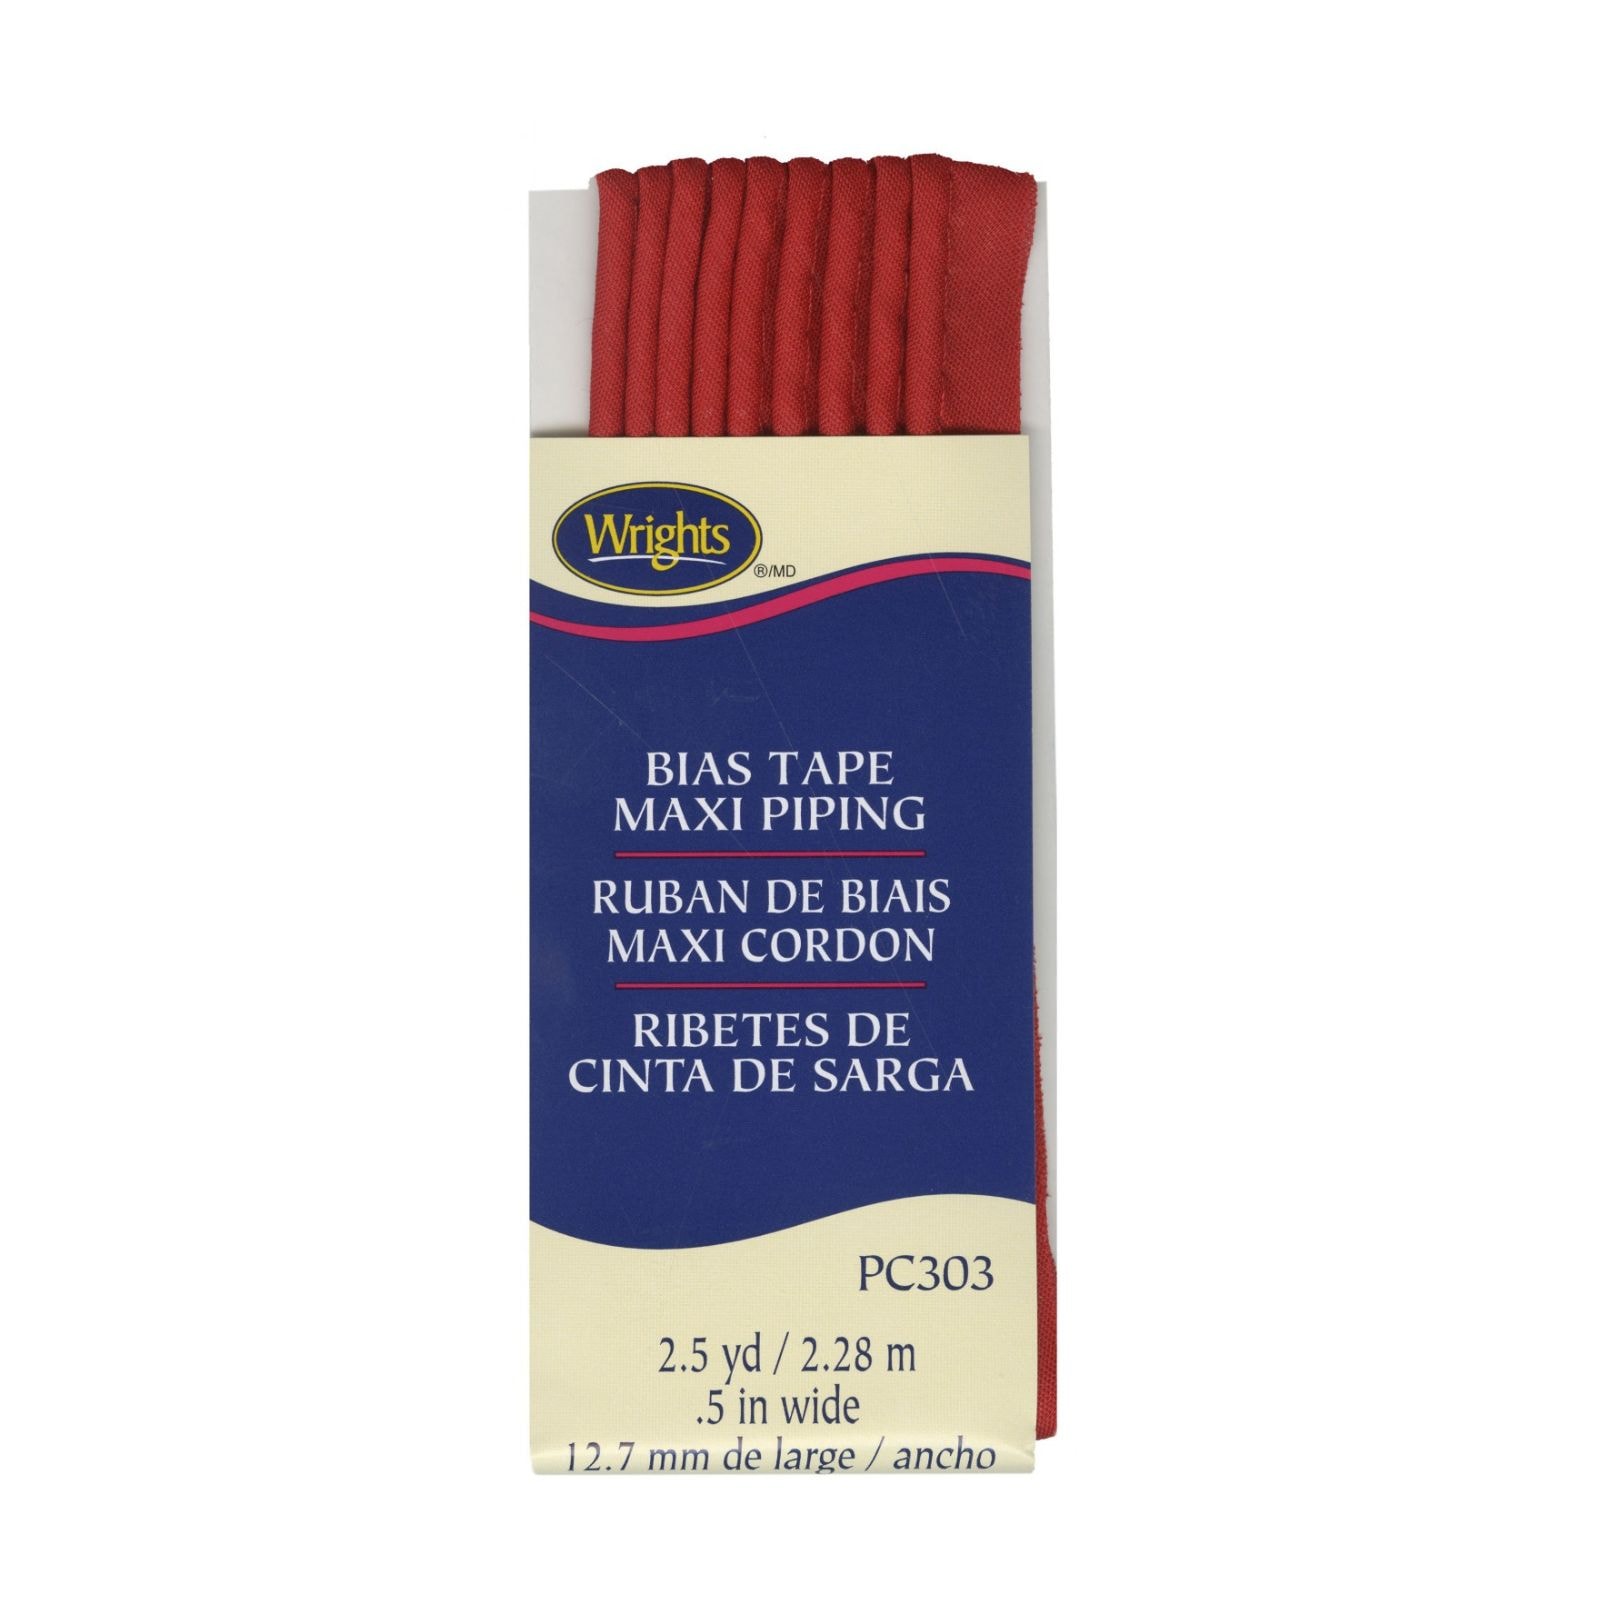 Wrights Bias Tape Maxi Piping - Red